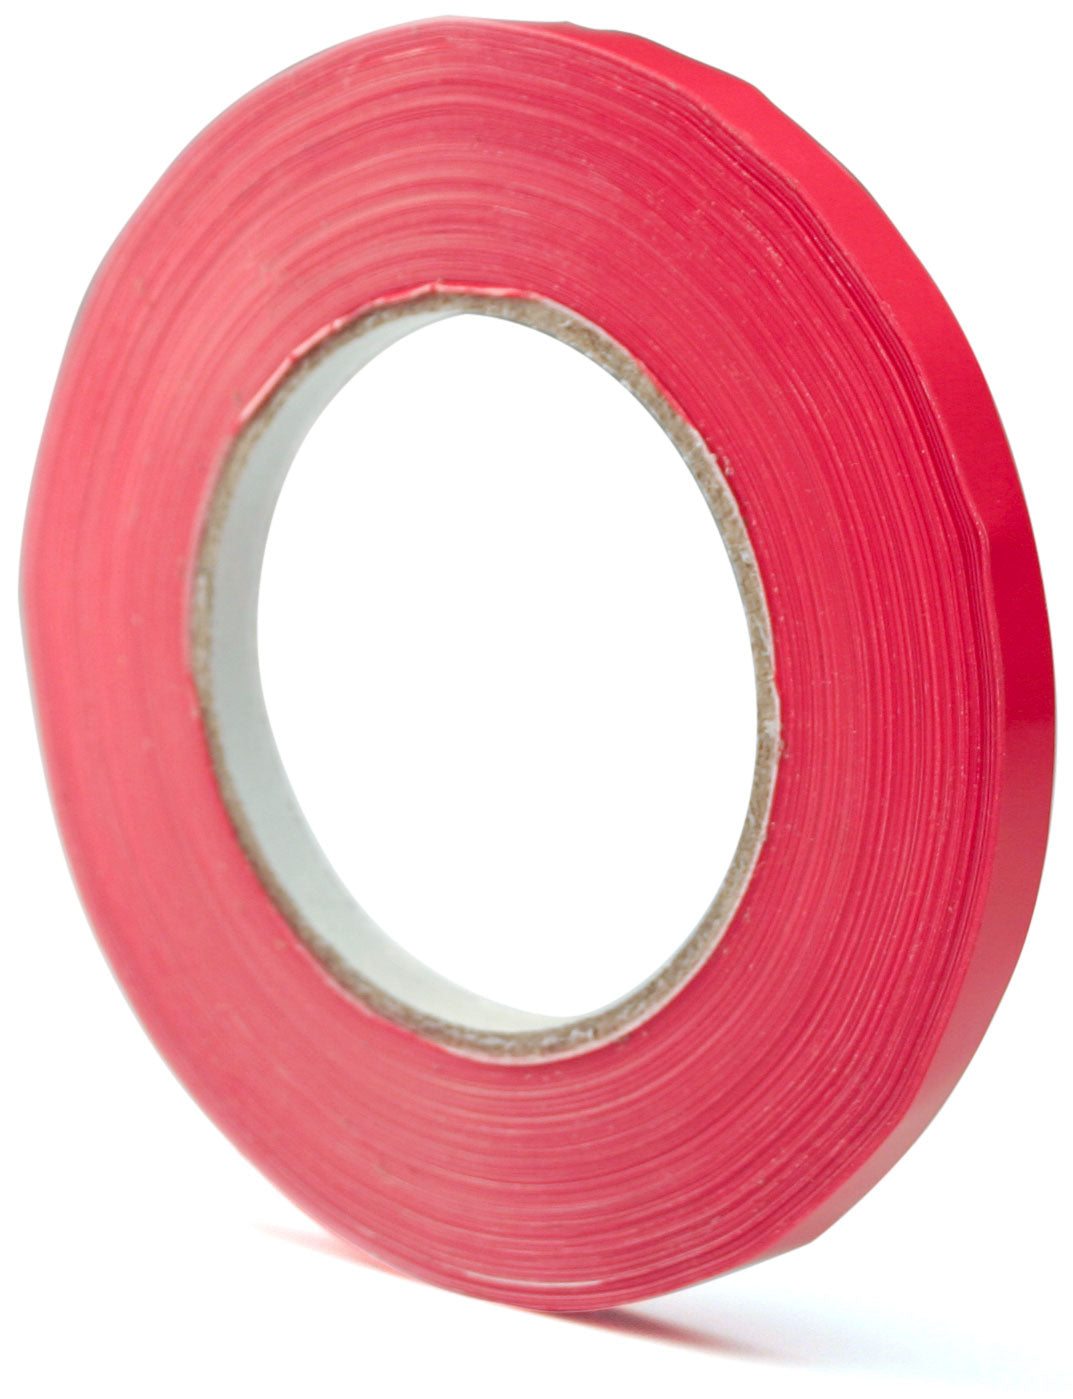 Ice Bag Tape - Red 3/8" x 540' (180 yards) - 16/Case